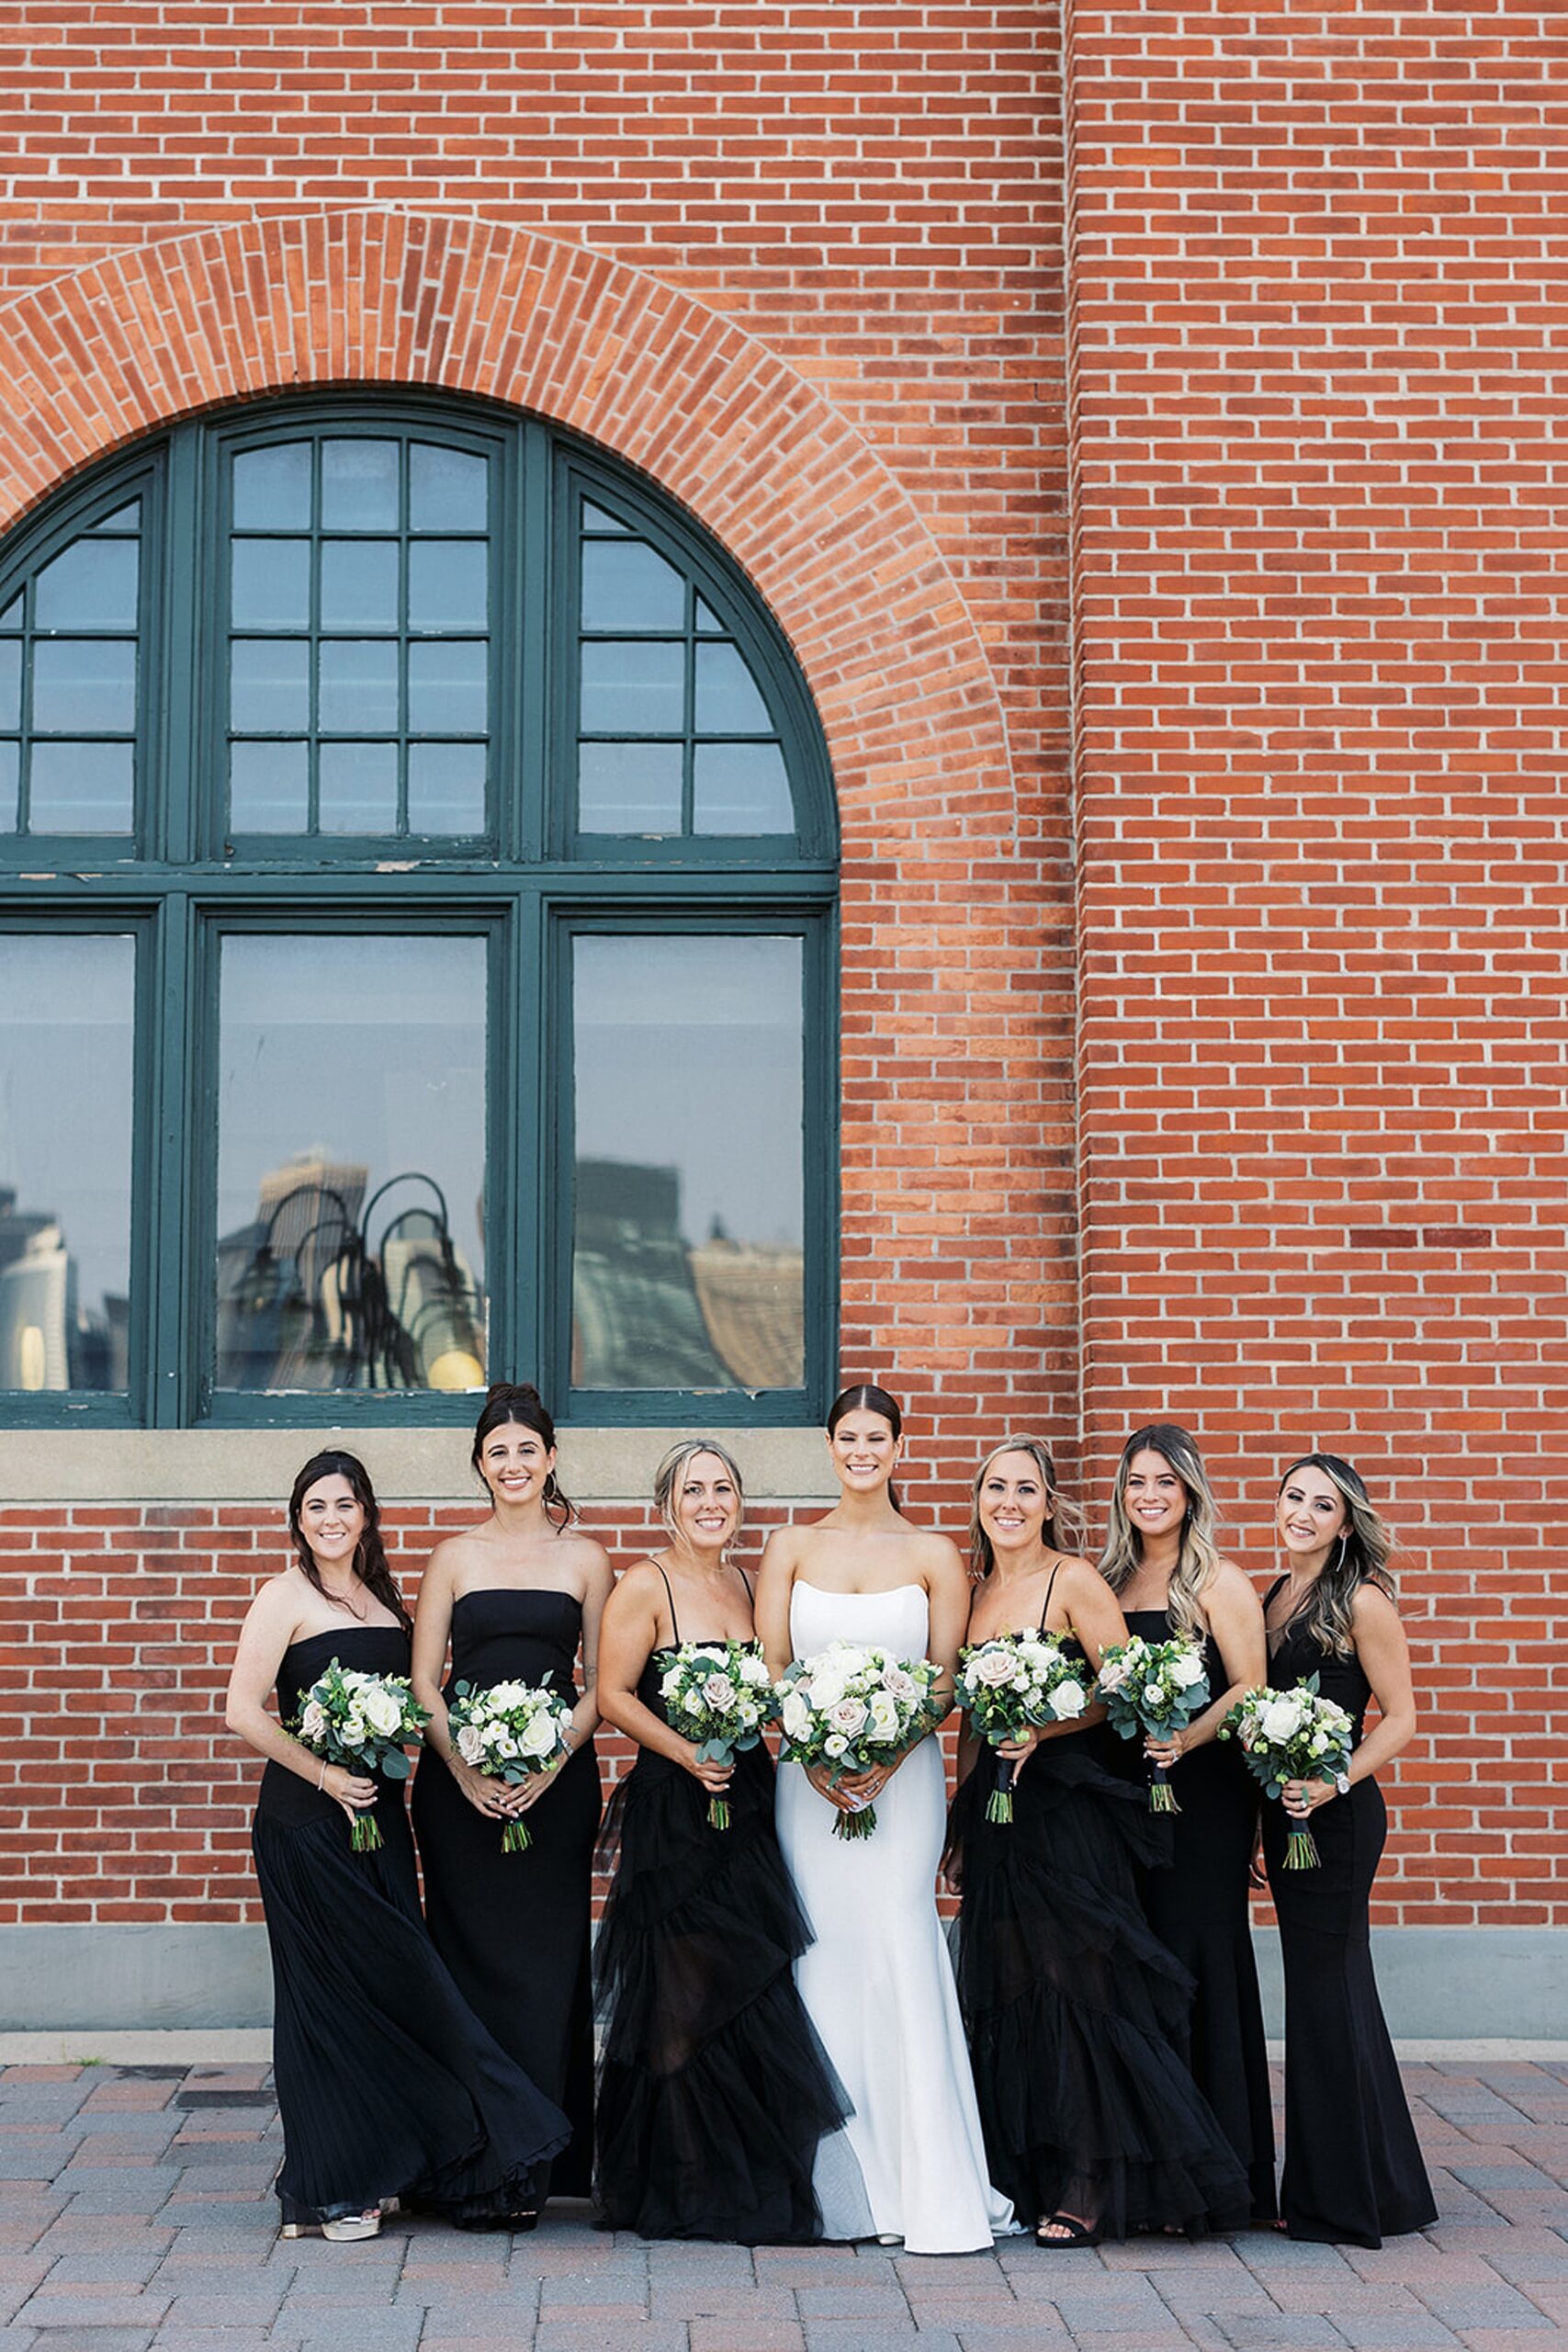 A bride stands by a brick building with her six bridesmaids